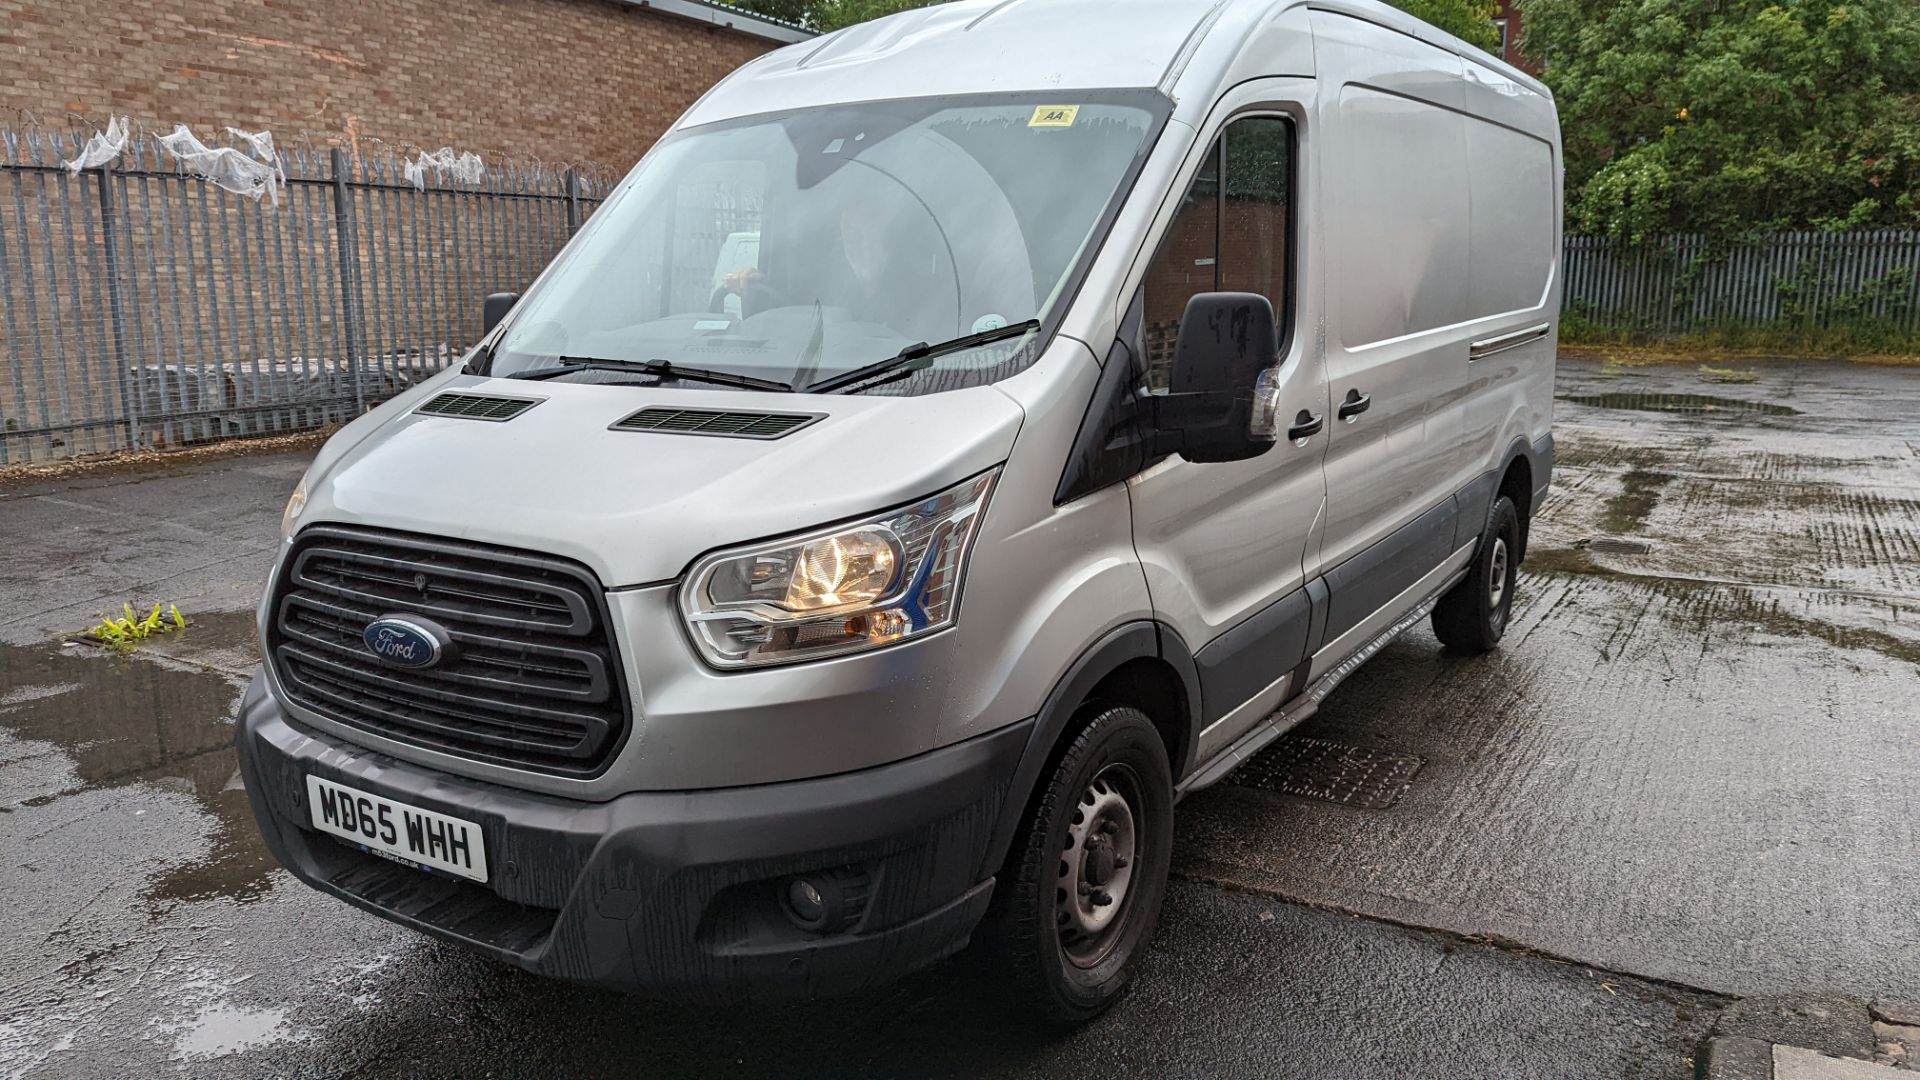 MD65 WHH Ford Transit 350, 6-speed manual gearbox, 2198cc diesel engine, 5981mm x 2550mm. Colour: Si - Image 8 of 51